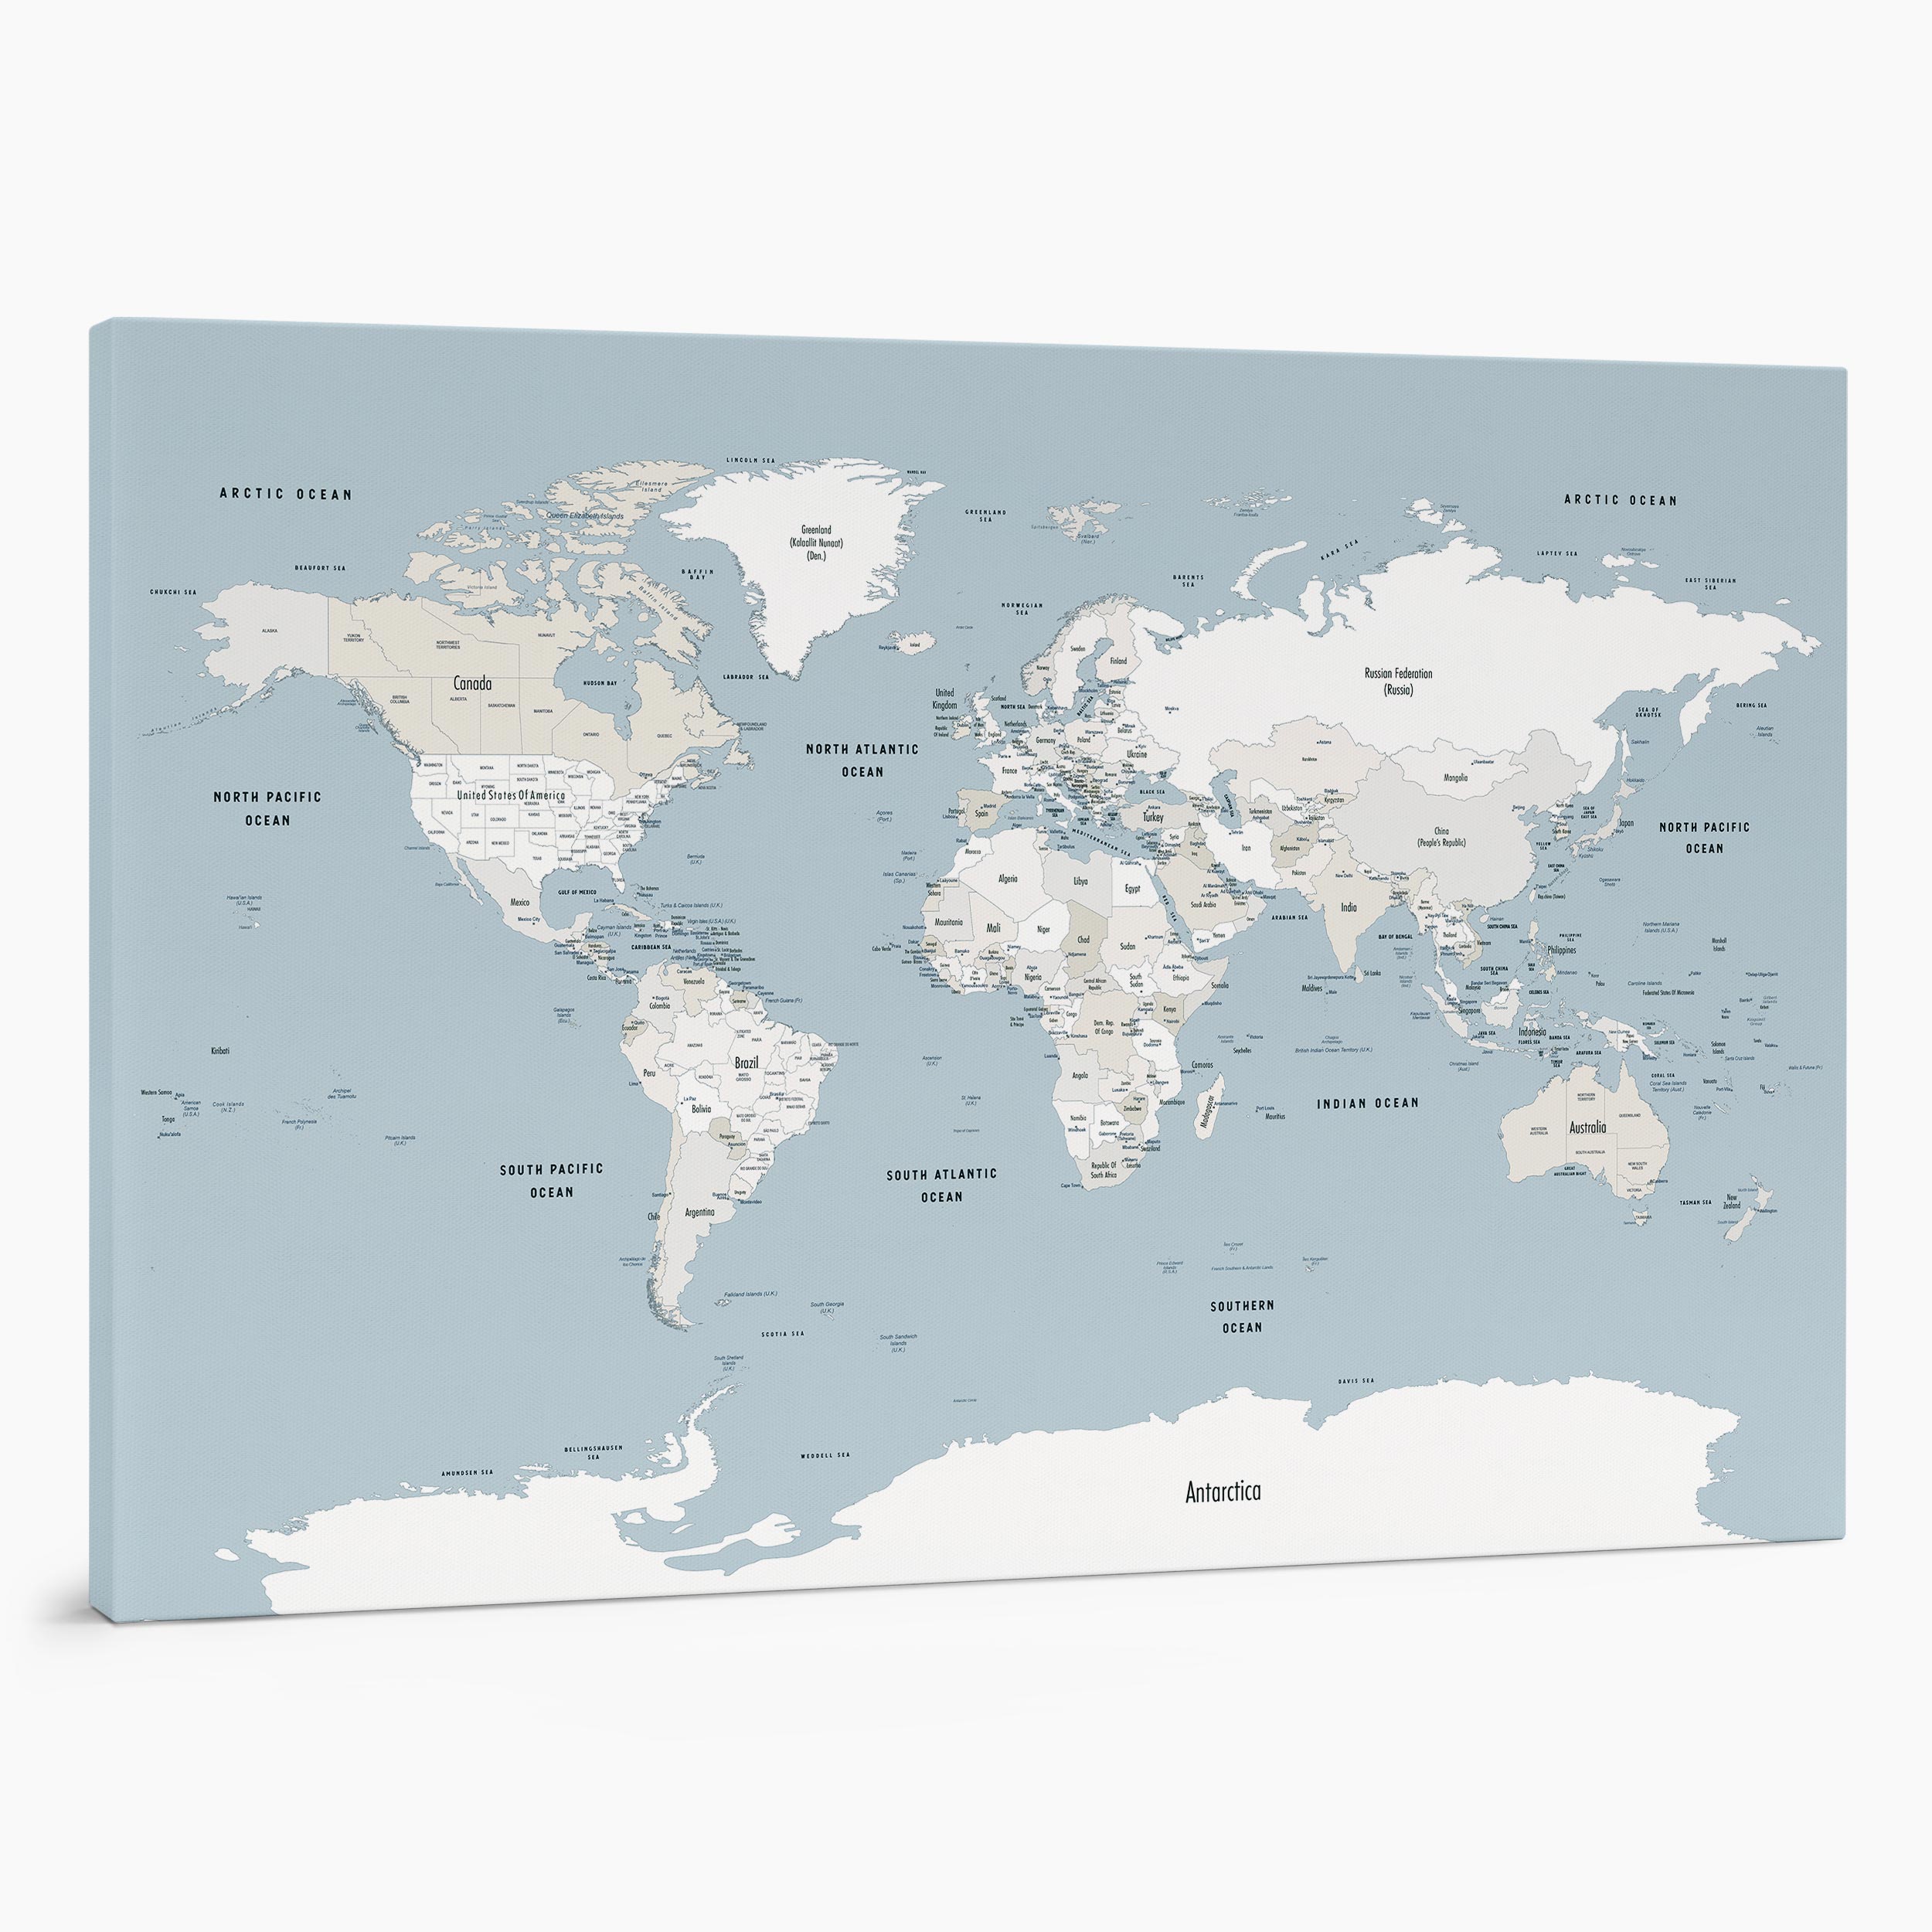 4MP small push pin world map to pin places you have visited mellow blue